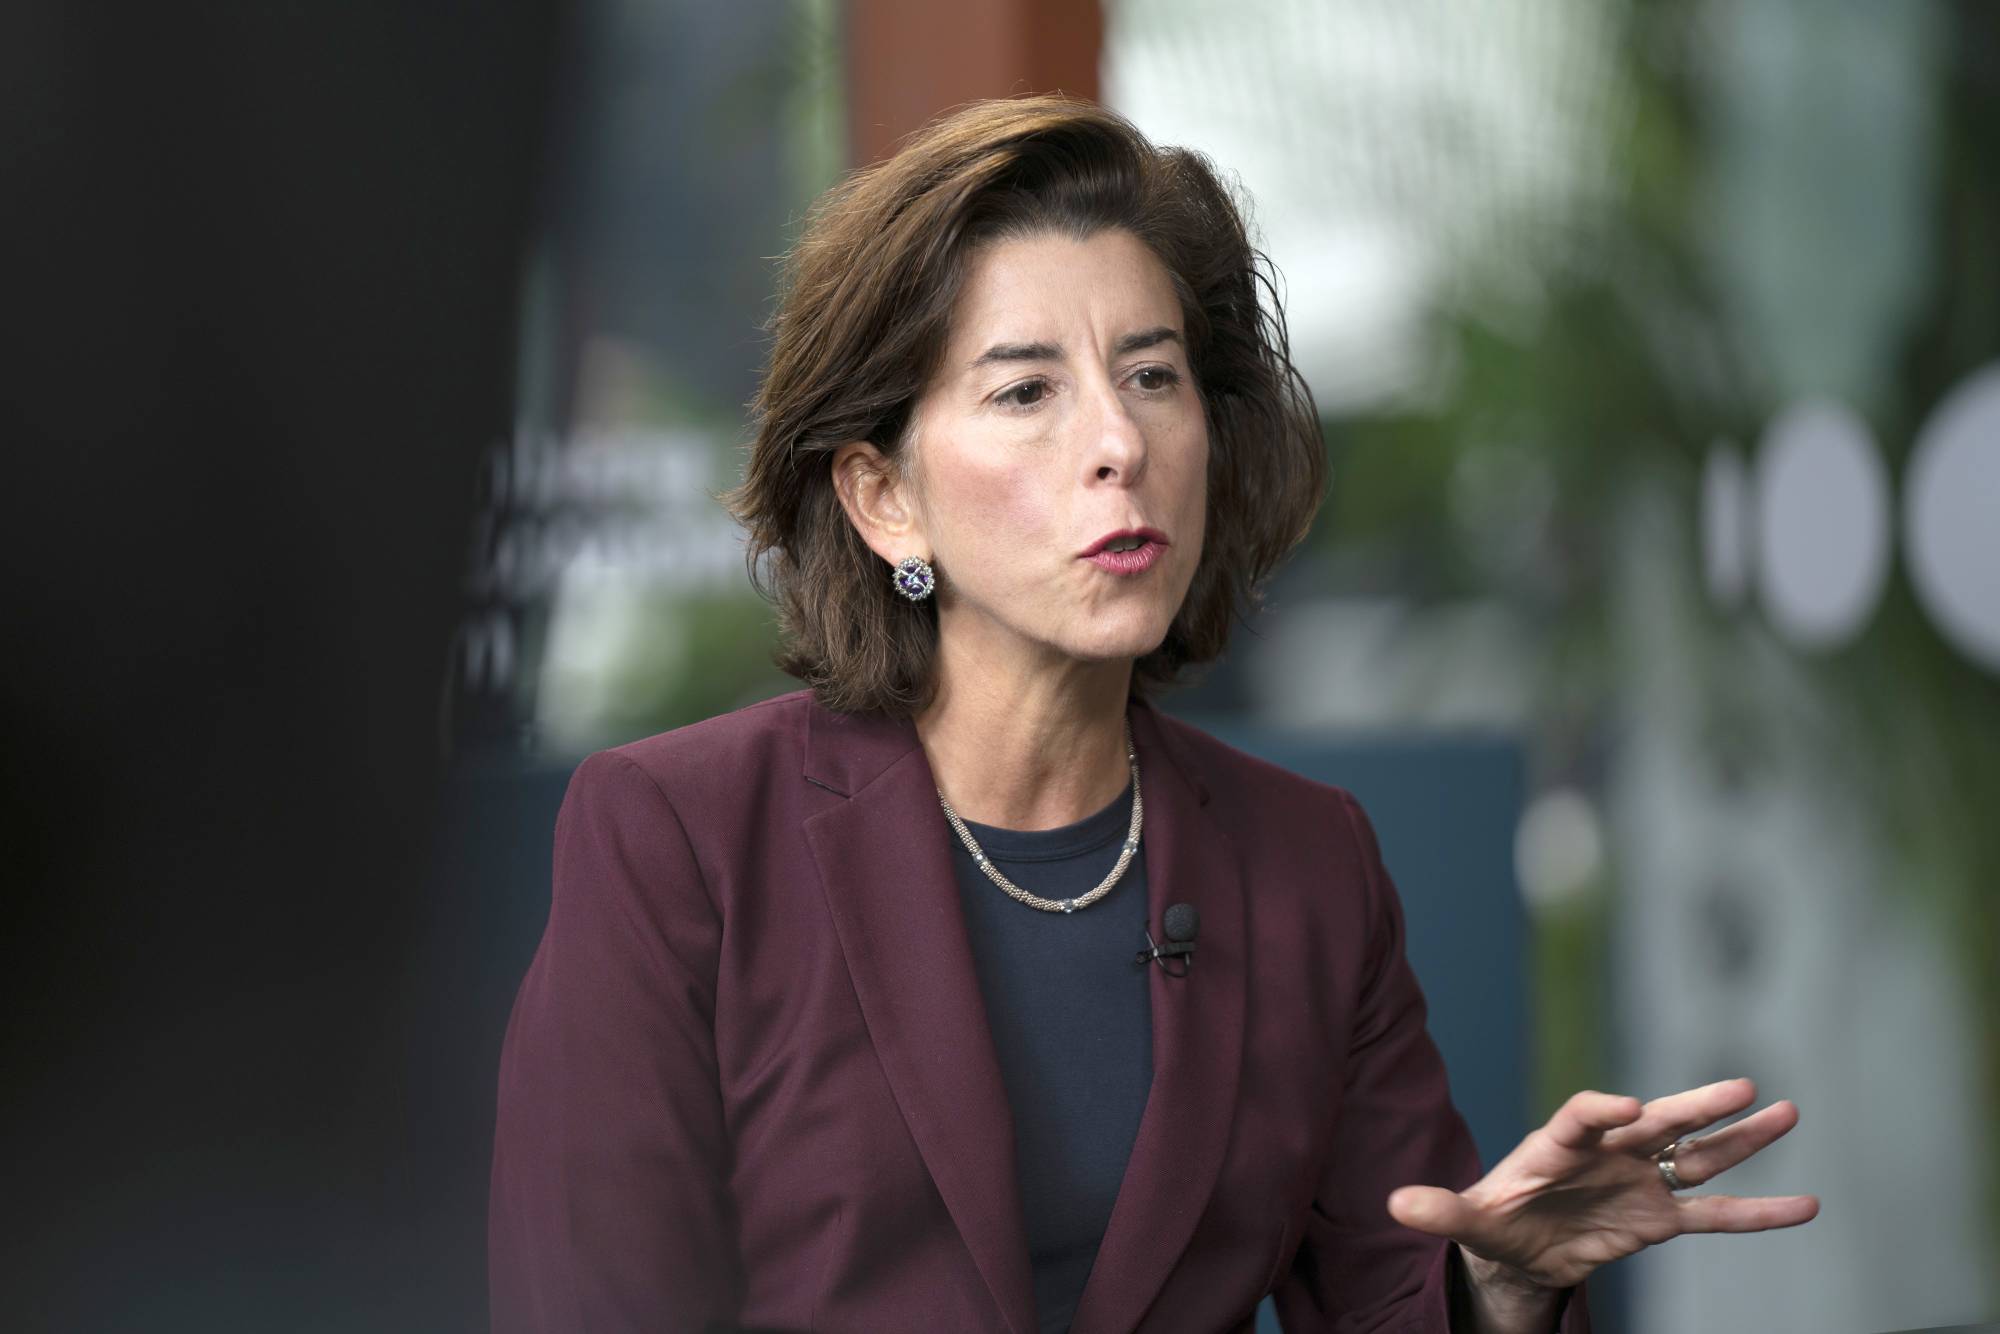 U.S. Commerce Secretary Gina Raimondo speaks during a Bloomberg Television interview on the sidelines of the Bloomberg New Economy Forum in Singapore on Wednesday. | BLOOMBERG